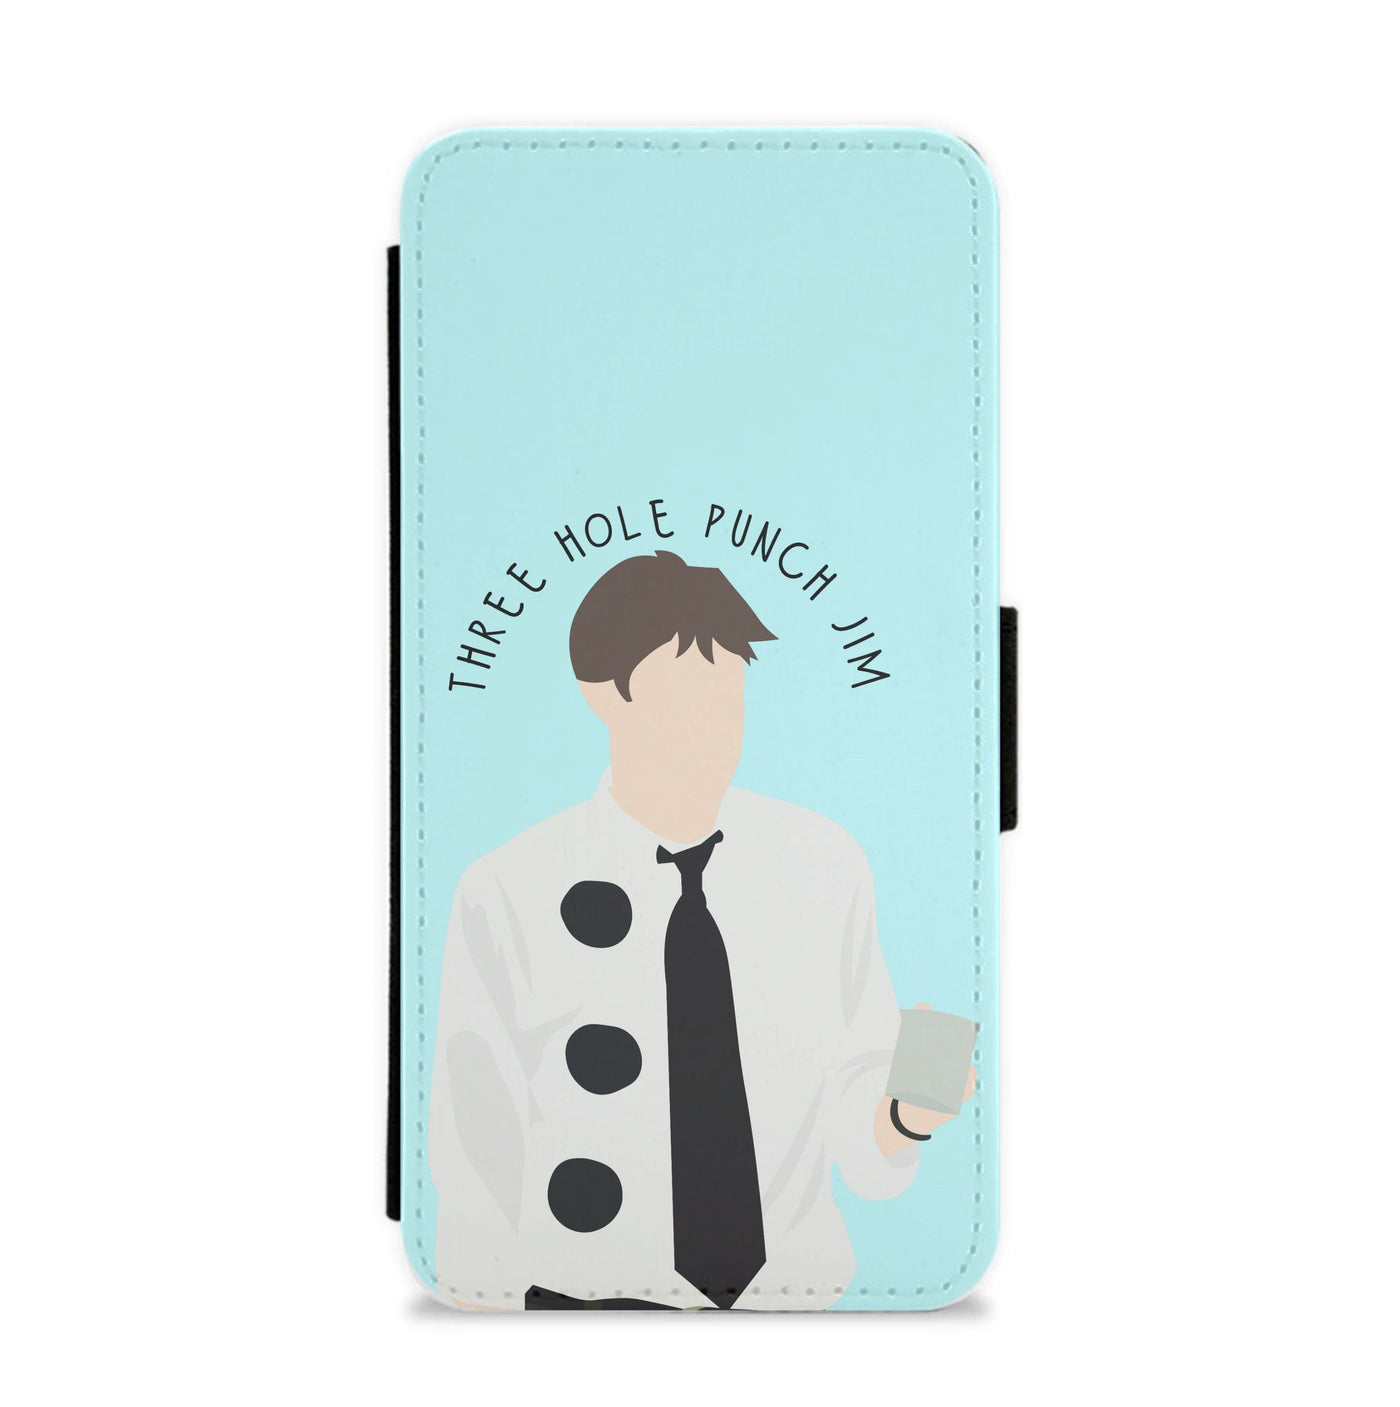 Three Hole Punch Jim The Office - Halloween Specials Flip / Wallet Phone Case